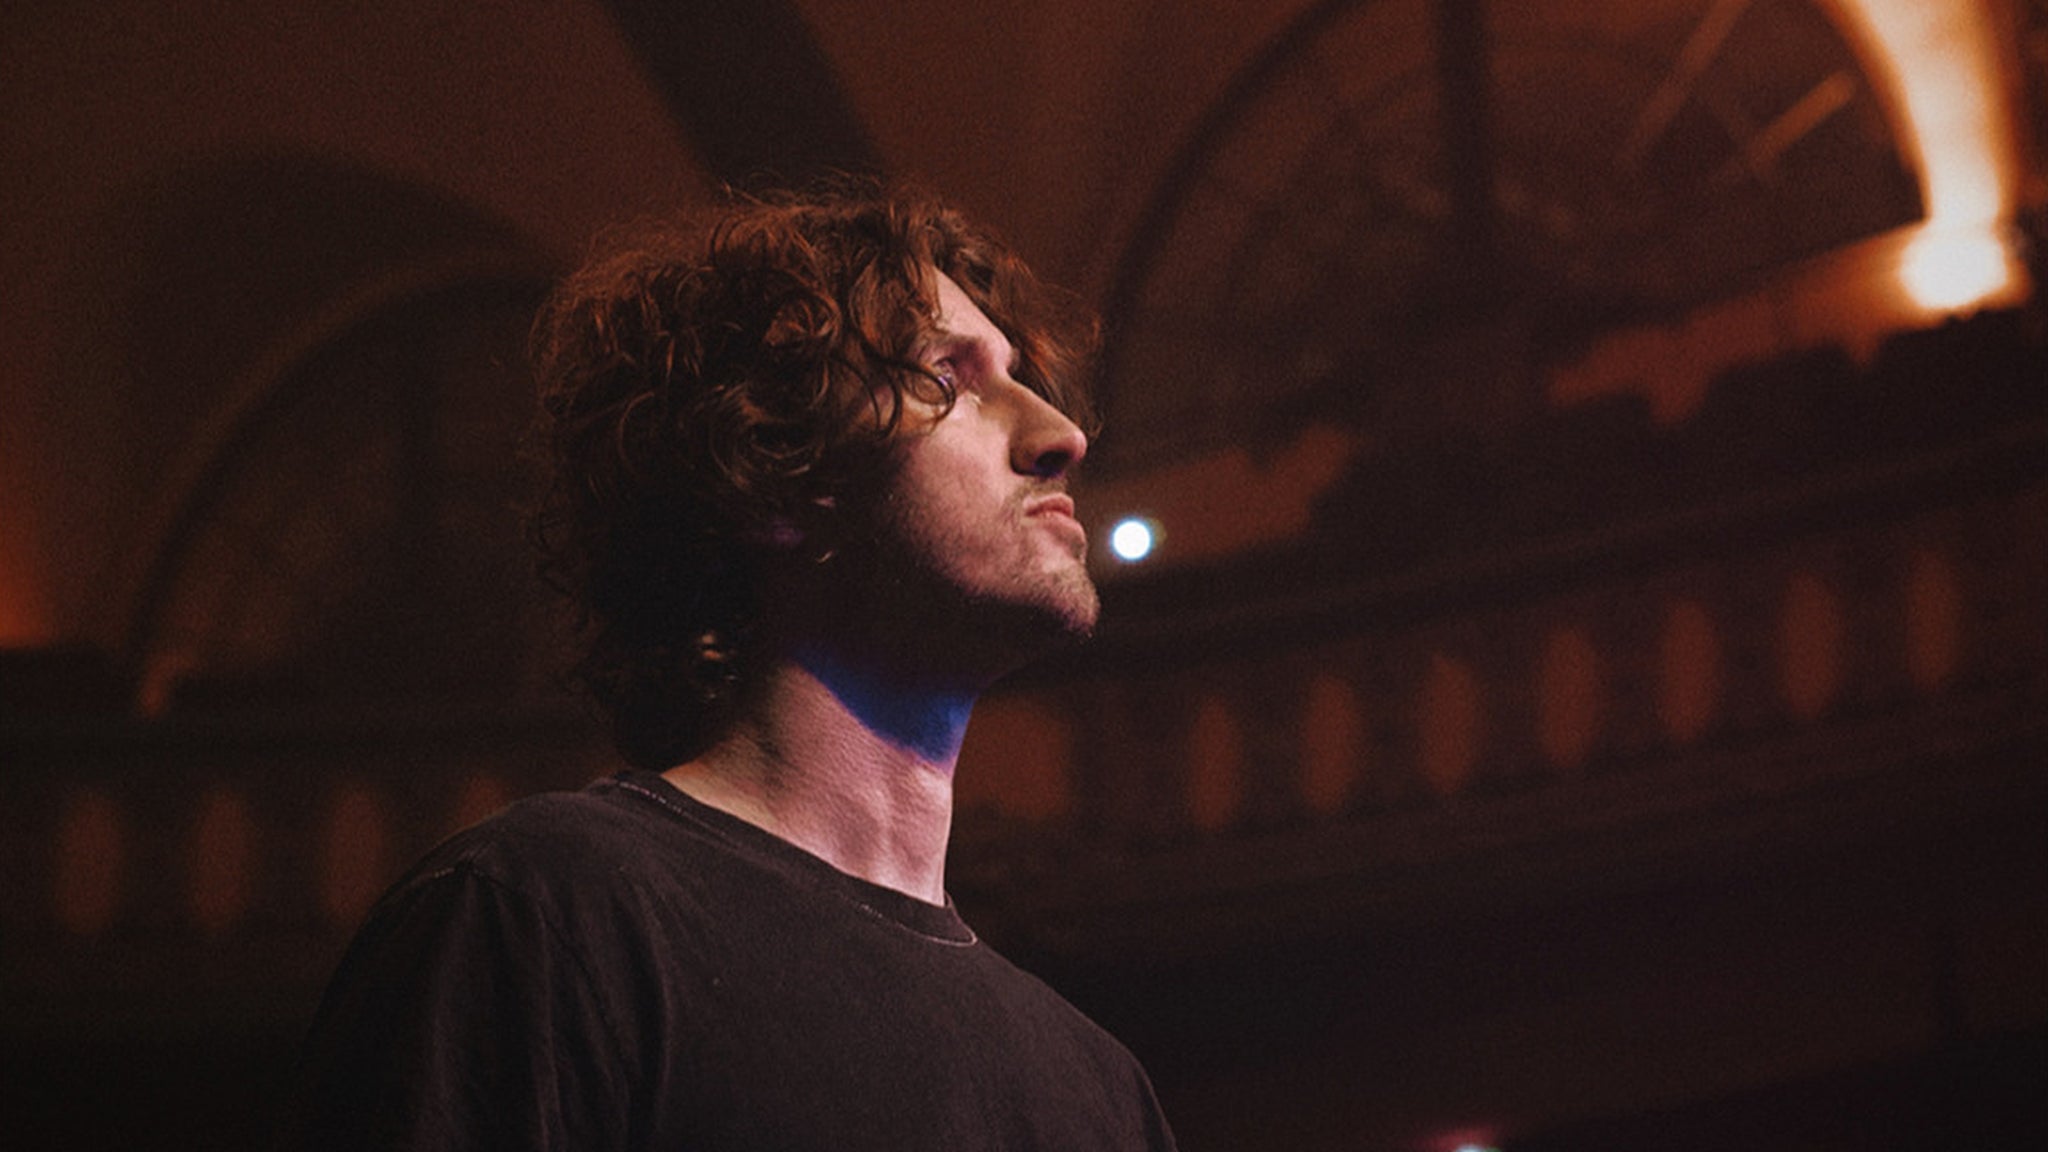 An Evening With: Dean Lewis presale password